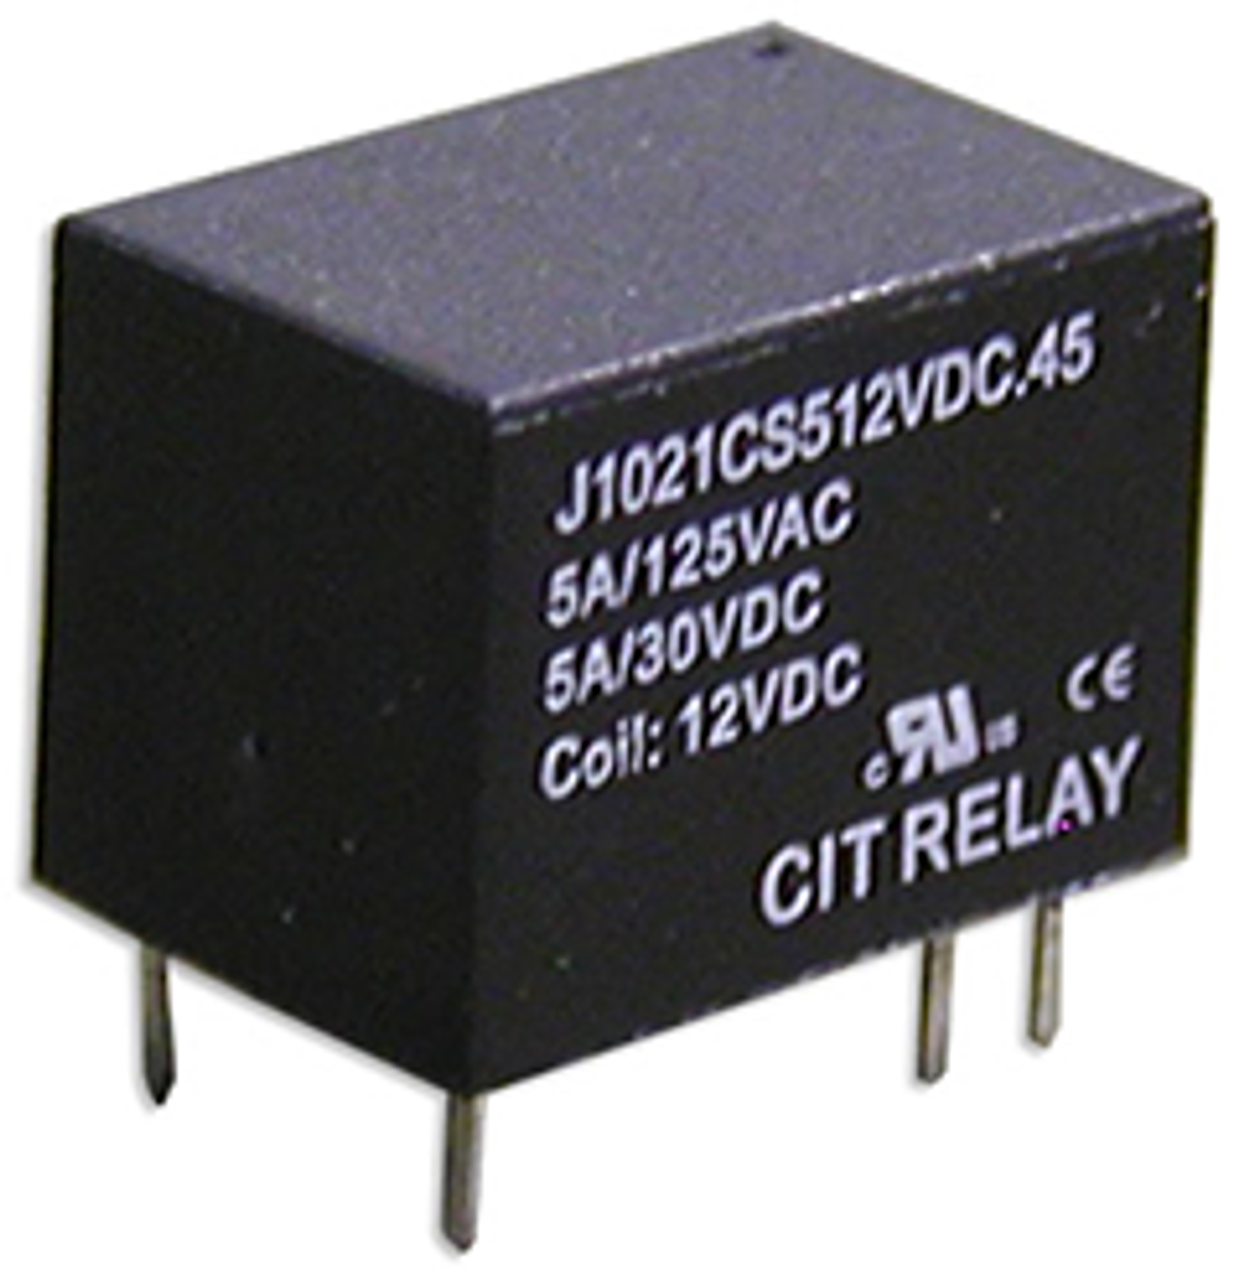 CIT Relay and Switch J1021BS39VDC.45 Power Relays